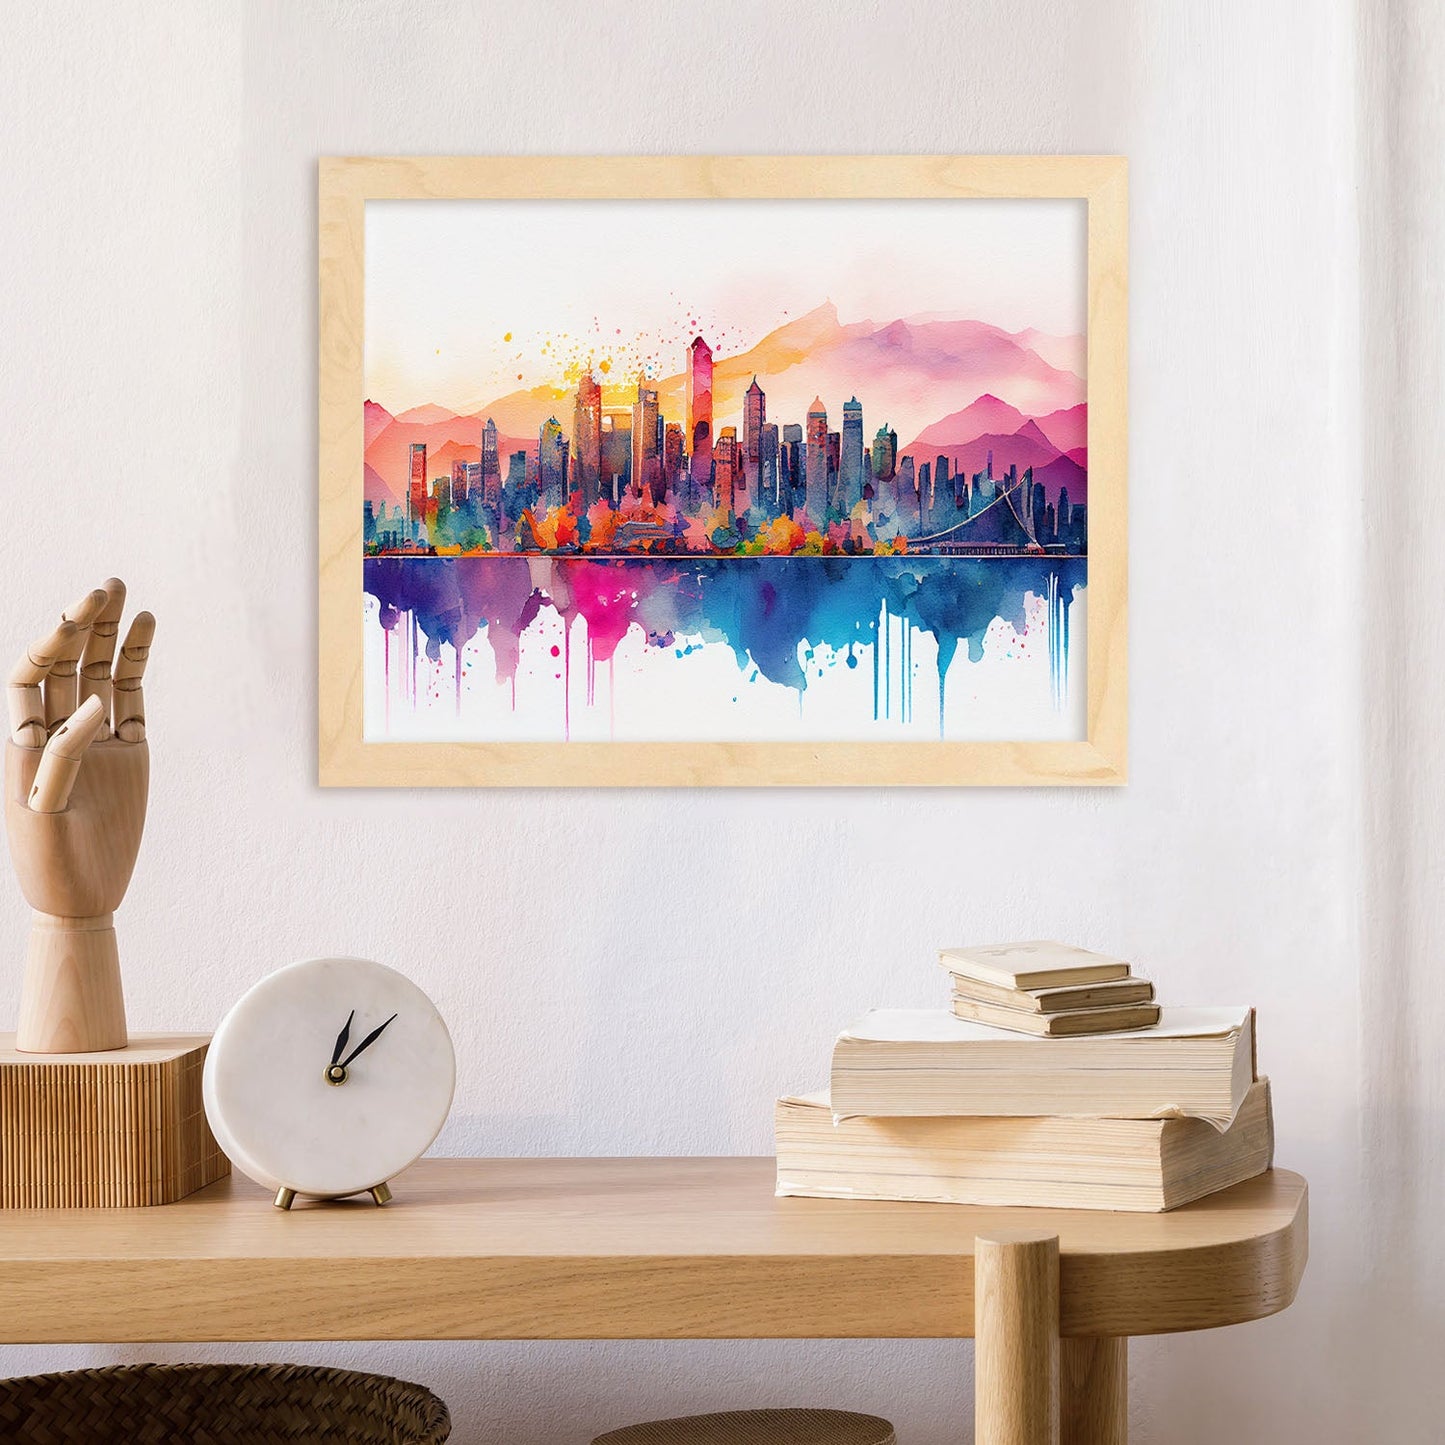 Nacnic watercolor of a skyline of the city of Vancouver. Aesthetic Wall Art Prints for Bedroom or Living Room Design.